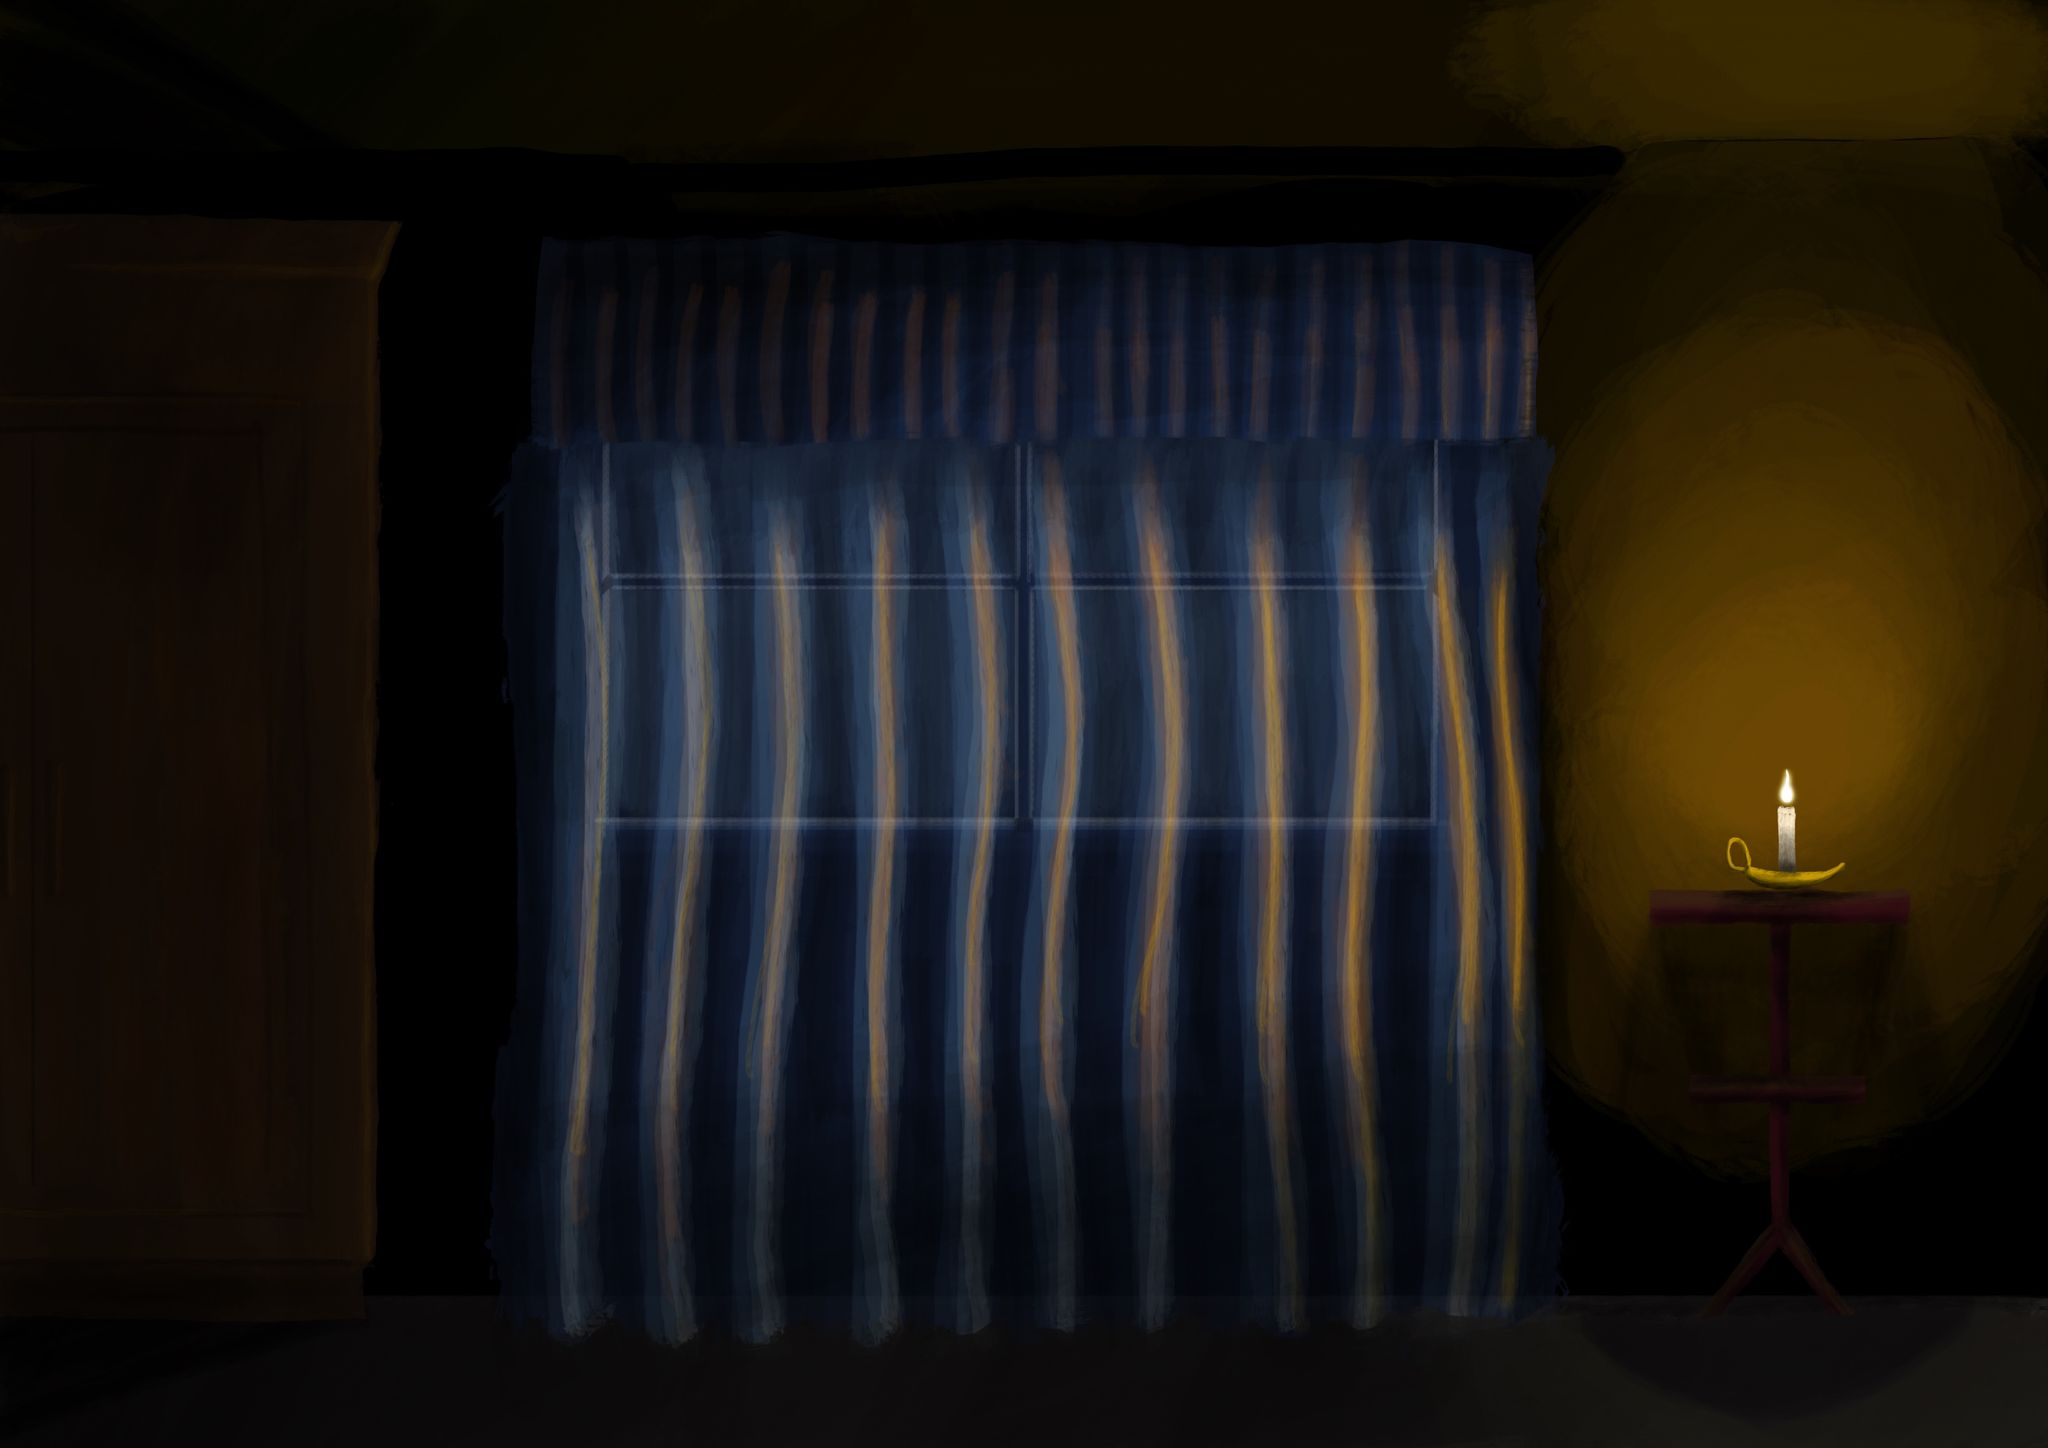 A painting of a room from the inside, with a window looking out into blue twilight and sheer curtains over it. A candle sits on a side table to the right, casting light onto the wall and the curtains, and a faint outside of a large wooden cupboard can be seen on the left side.